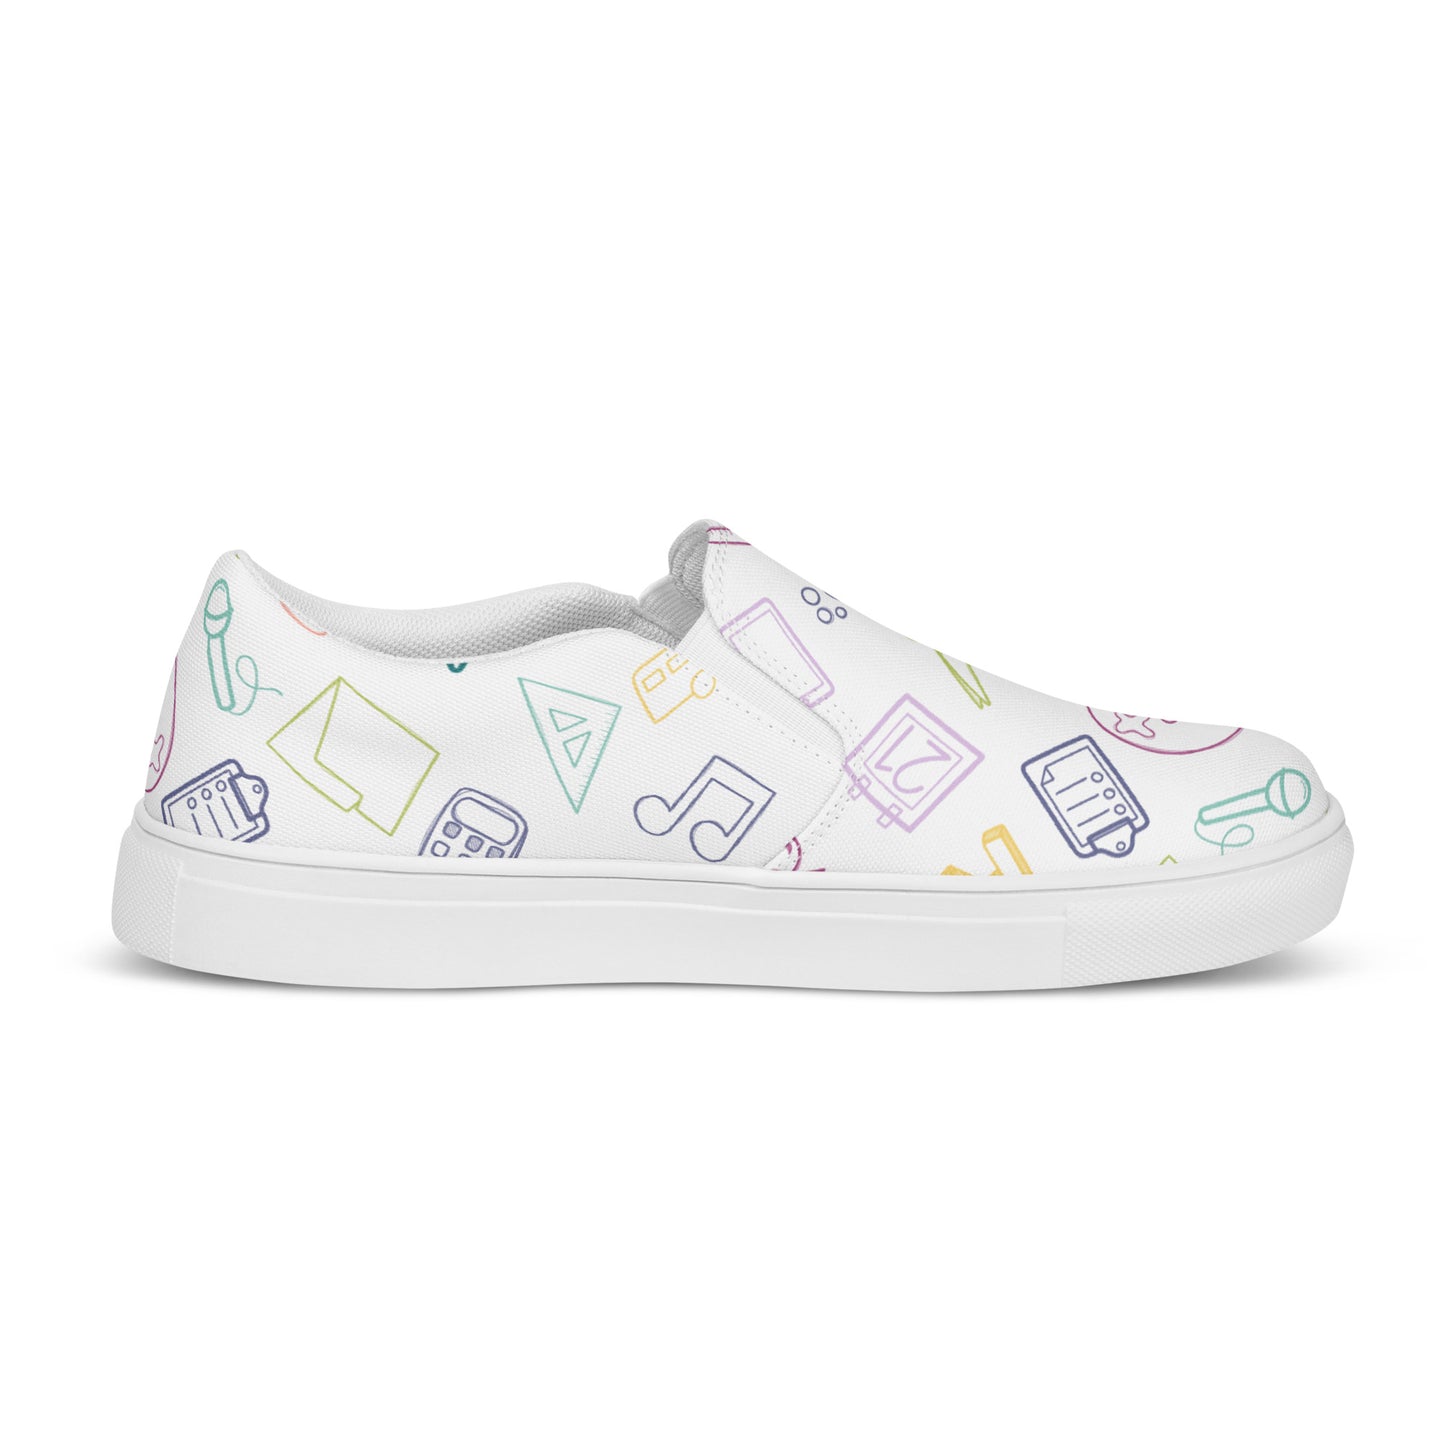 Muted Rainbow on White Elementary Doodles Slip-on Canvas Shoes (Women's Sizes)